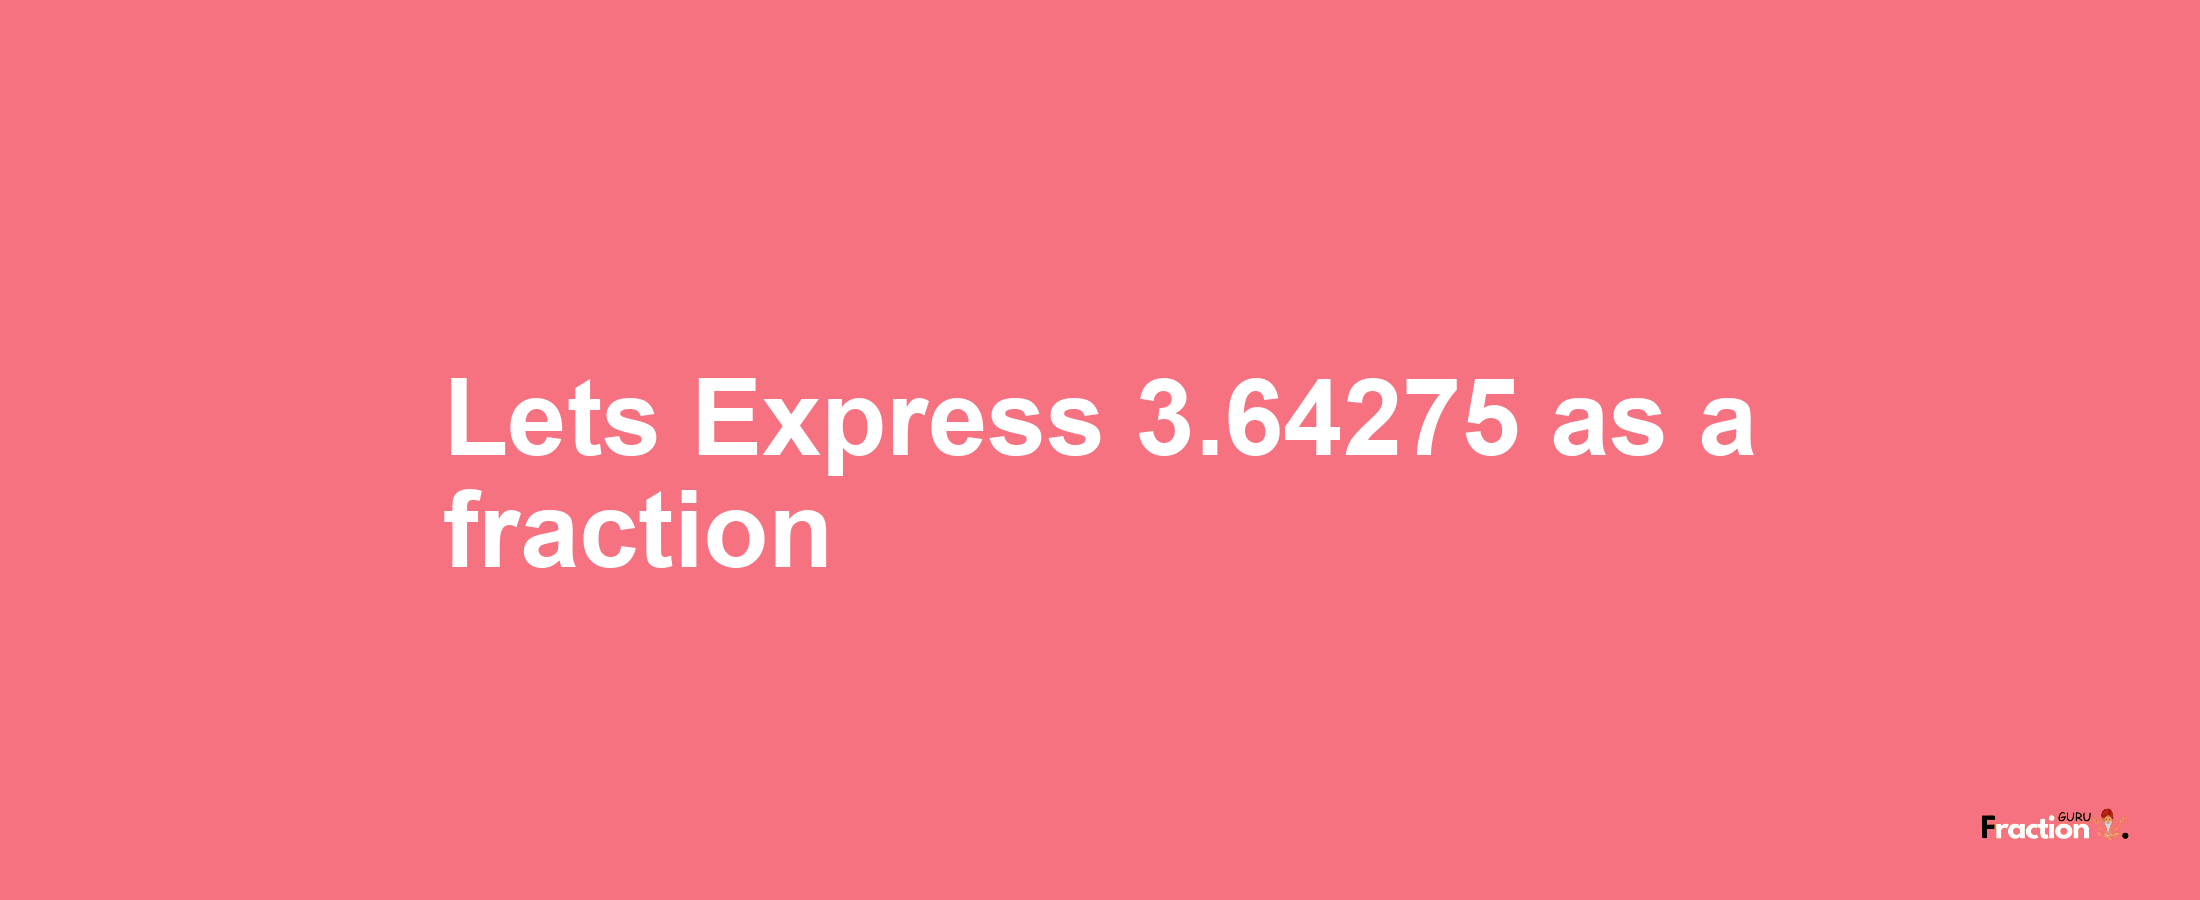 Lets Express 3.64275 as afraction